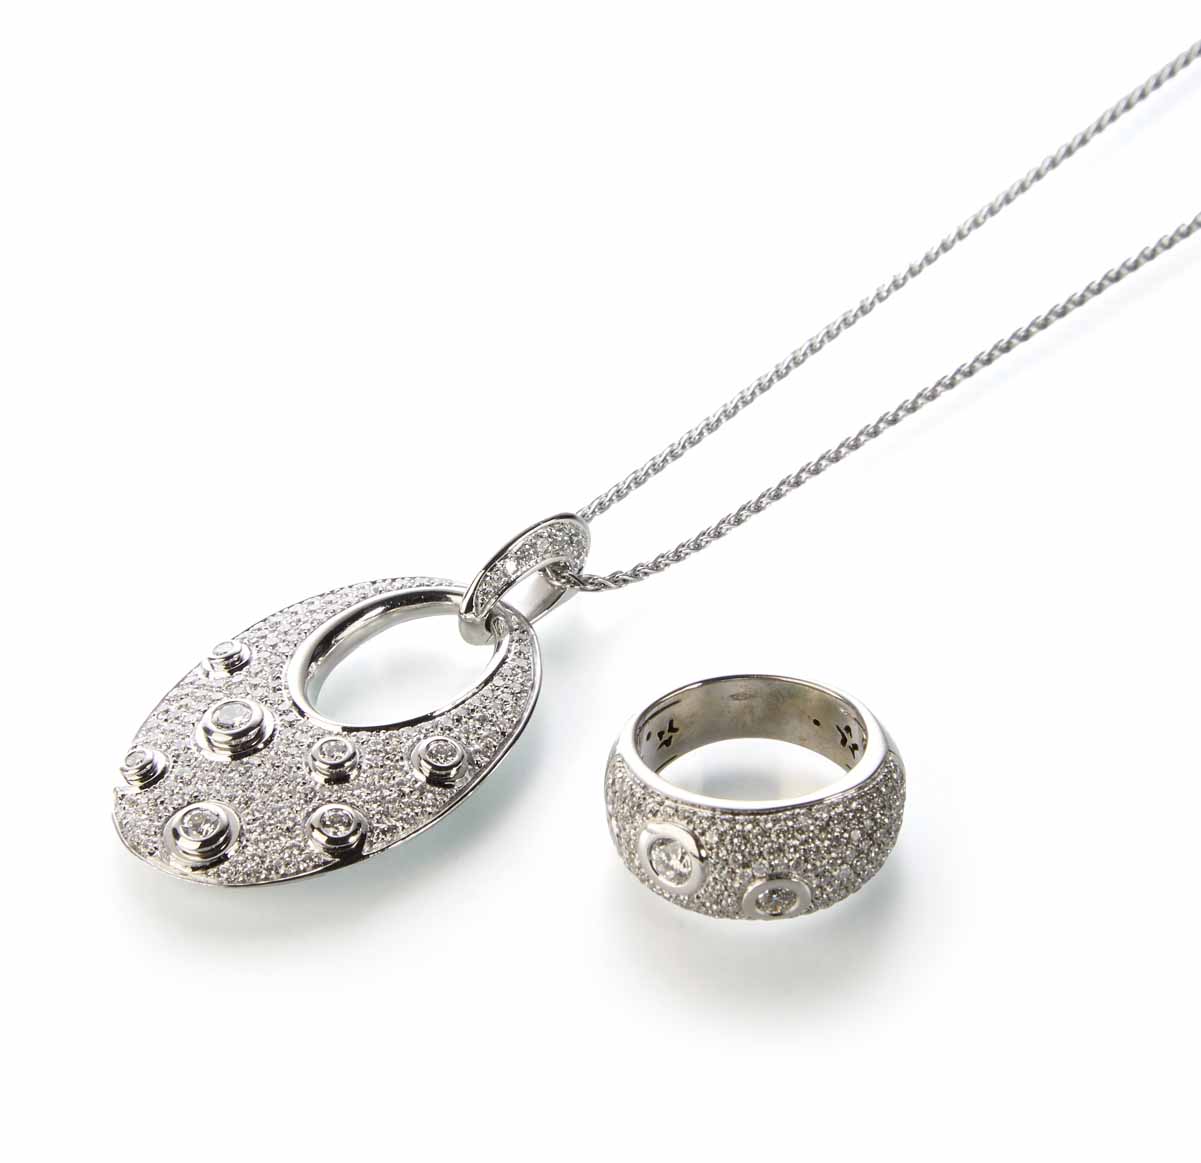 An 18ct white gold pave set diamond pendant and chain with matching ring. The oval modern design